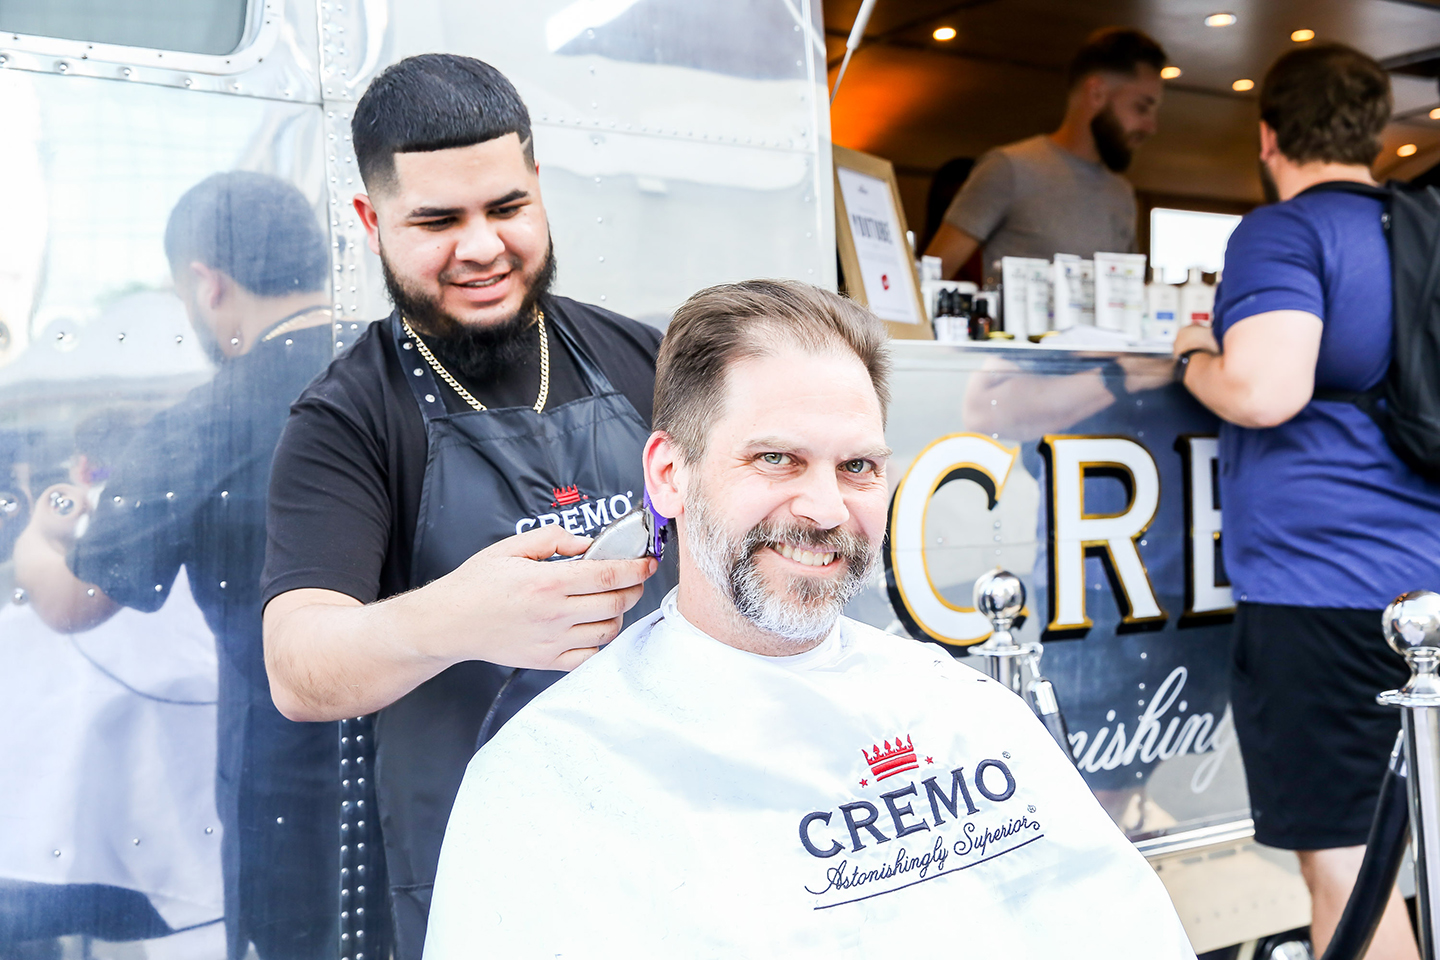 Cremo Grooming Experience gave away free shaves, beard trims, haircuts, and products. Photo by Diego Donamaria